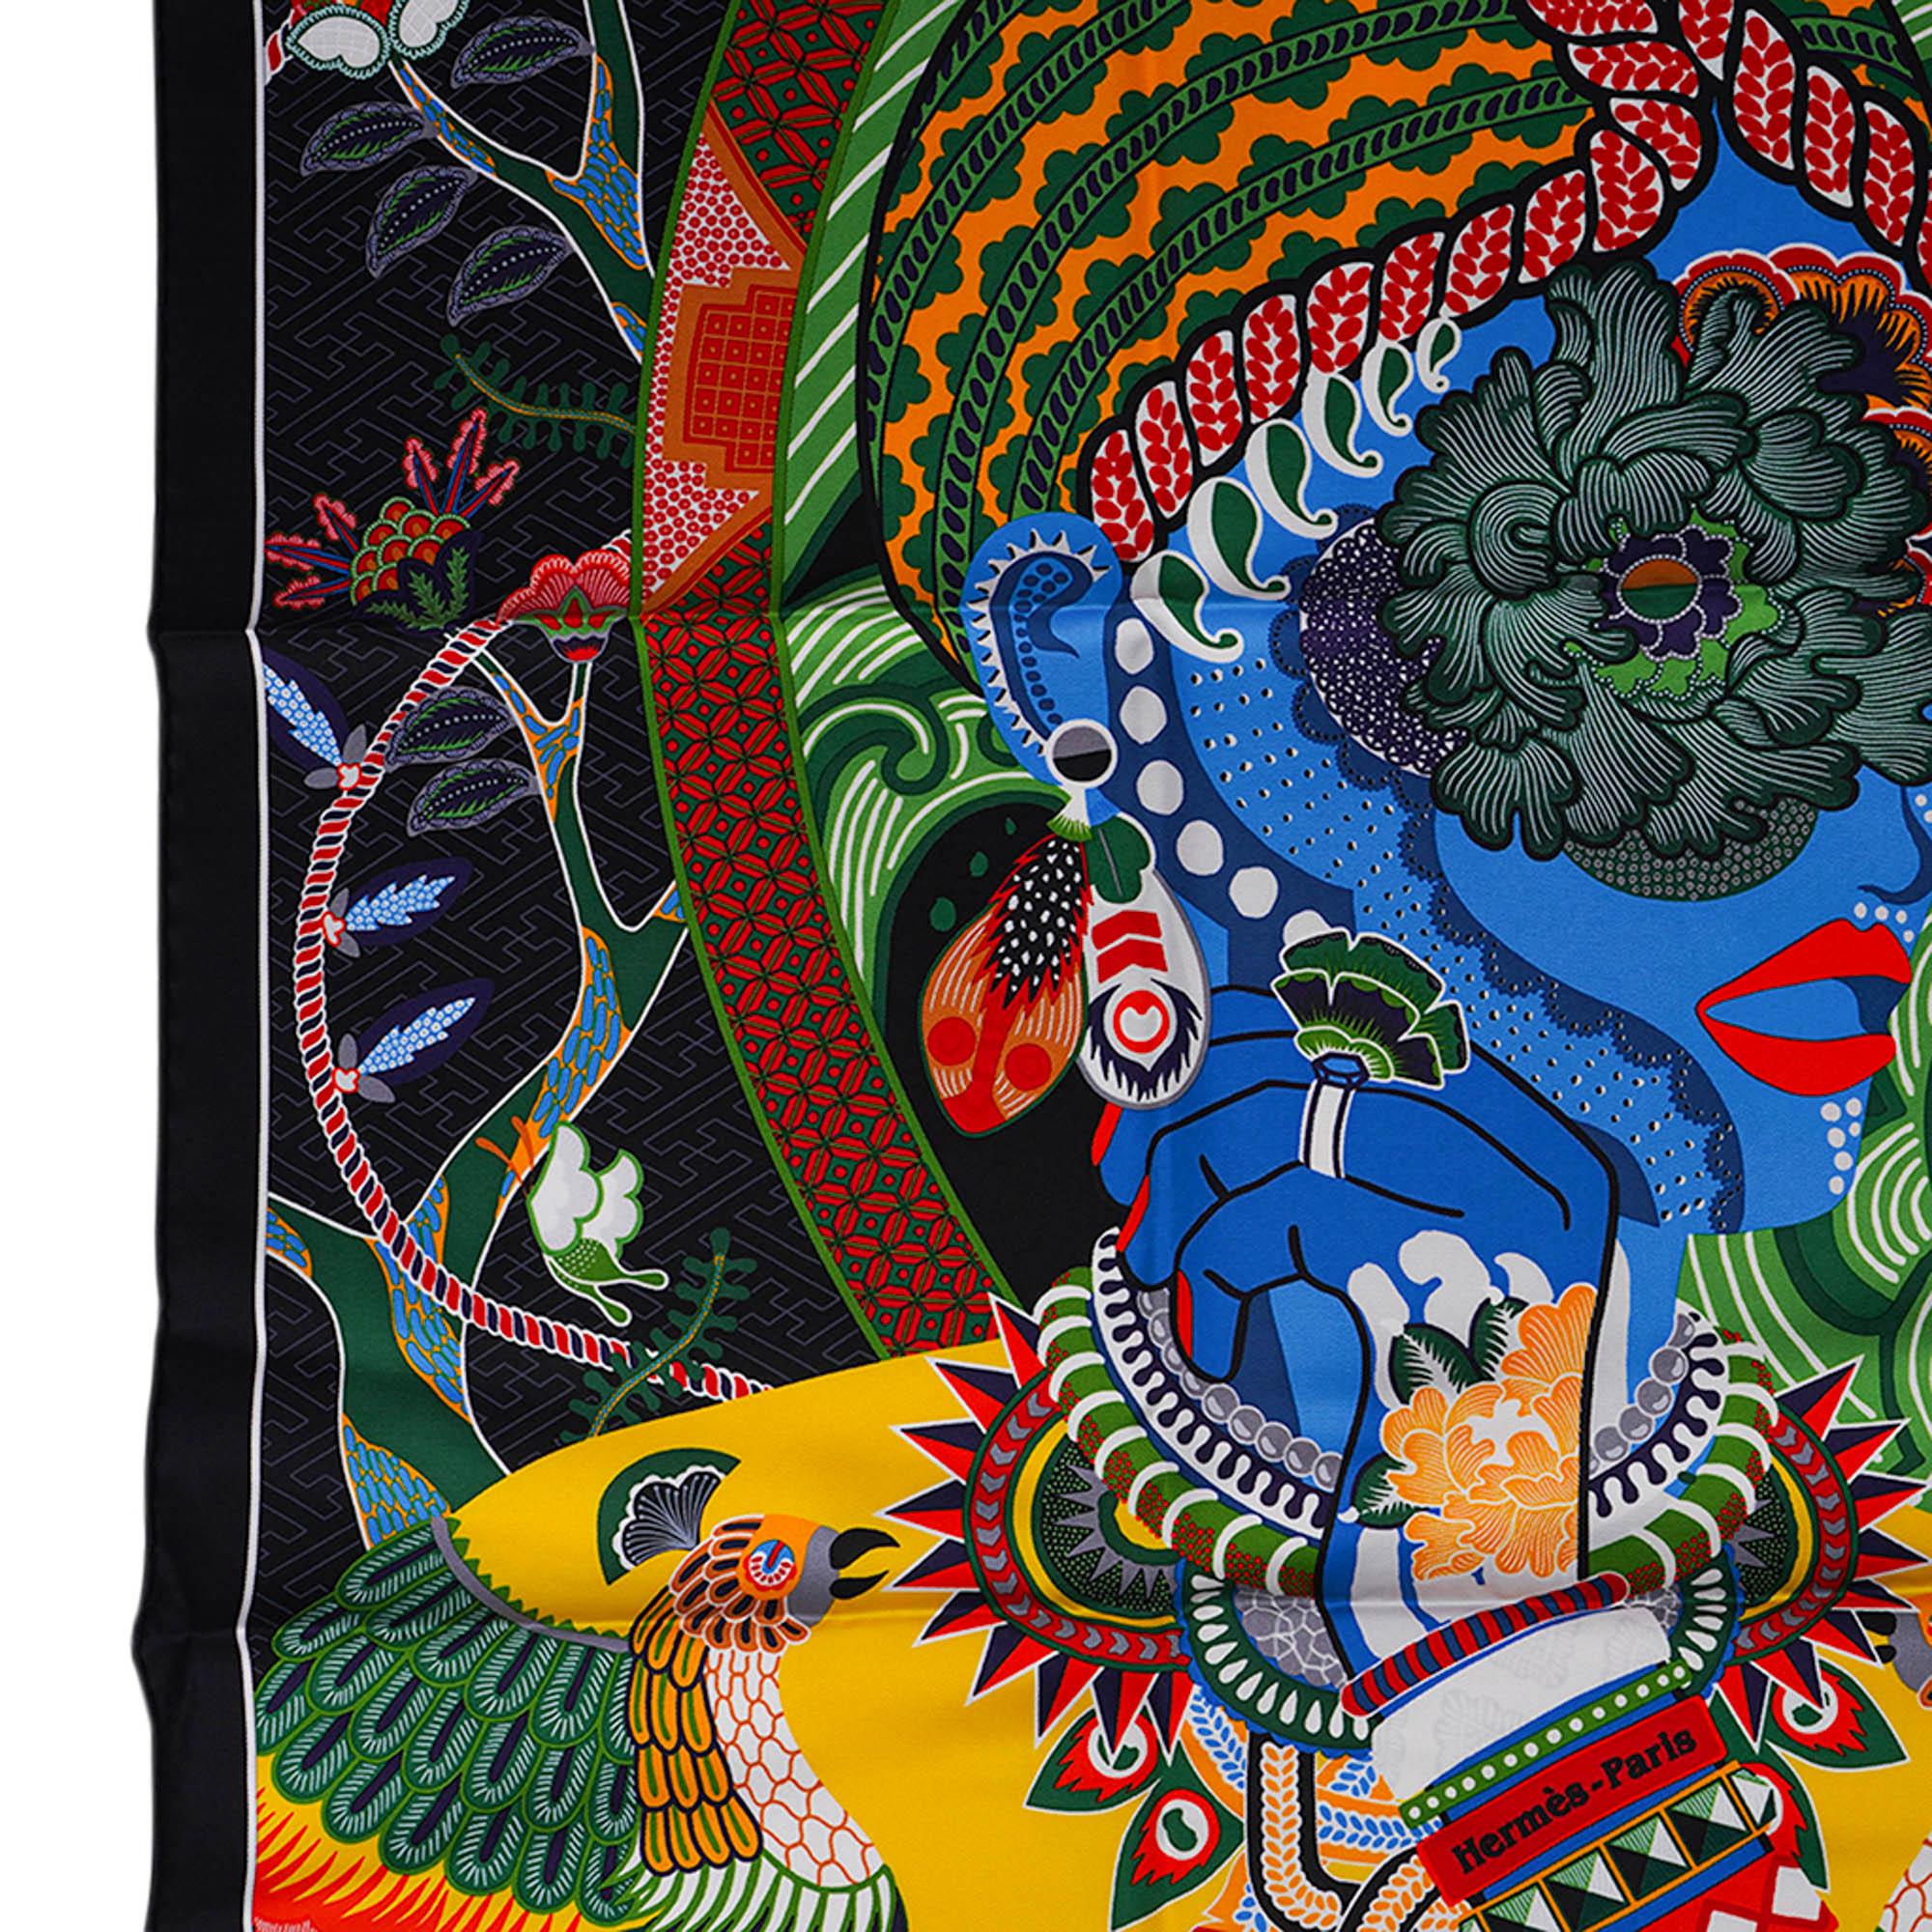 Mightychic offers an Hermes Duo Cosmique silk twill scarf.
Featured in Noir, Vert andMulticolore colorway.
The scarf pays tribute to Tantric Buddhism and Japanese culture.
Designed by Kohei Kyomori who is the winner of the Grand Prix du Carré Hermès